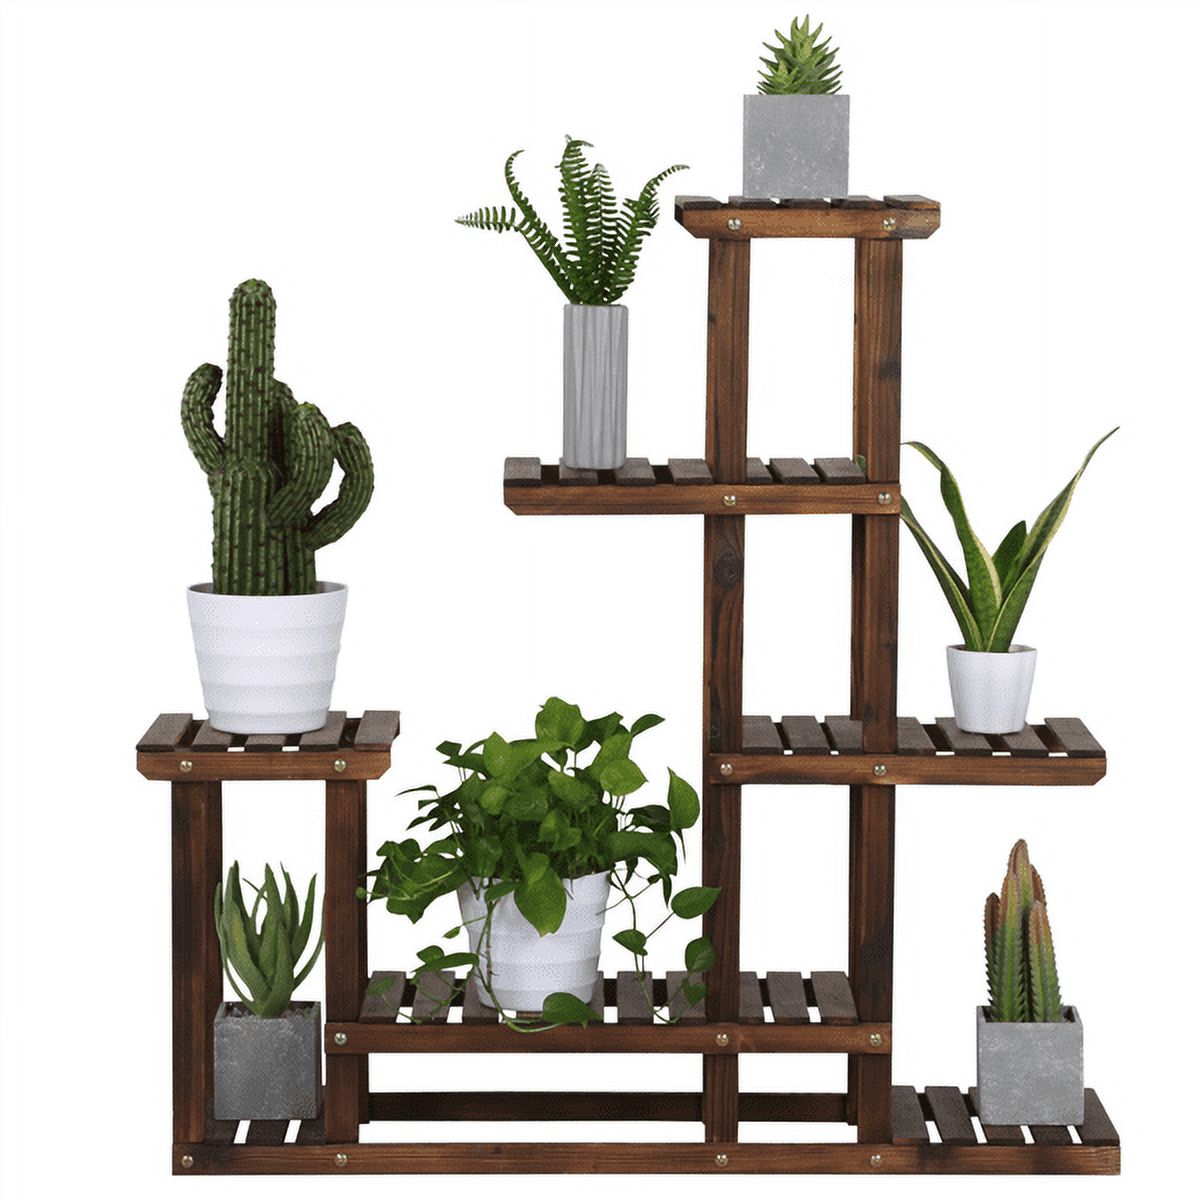 6-Shelf Wooden Flower Stand Plant Display for Indoors and Outdoors - image 1 of 7